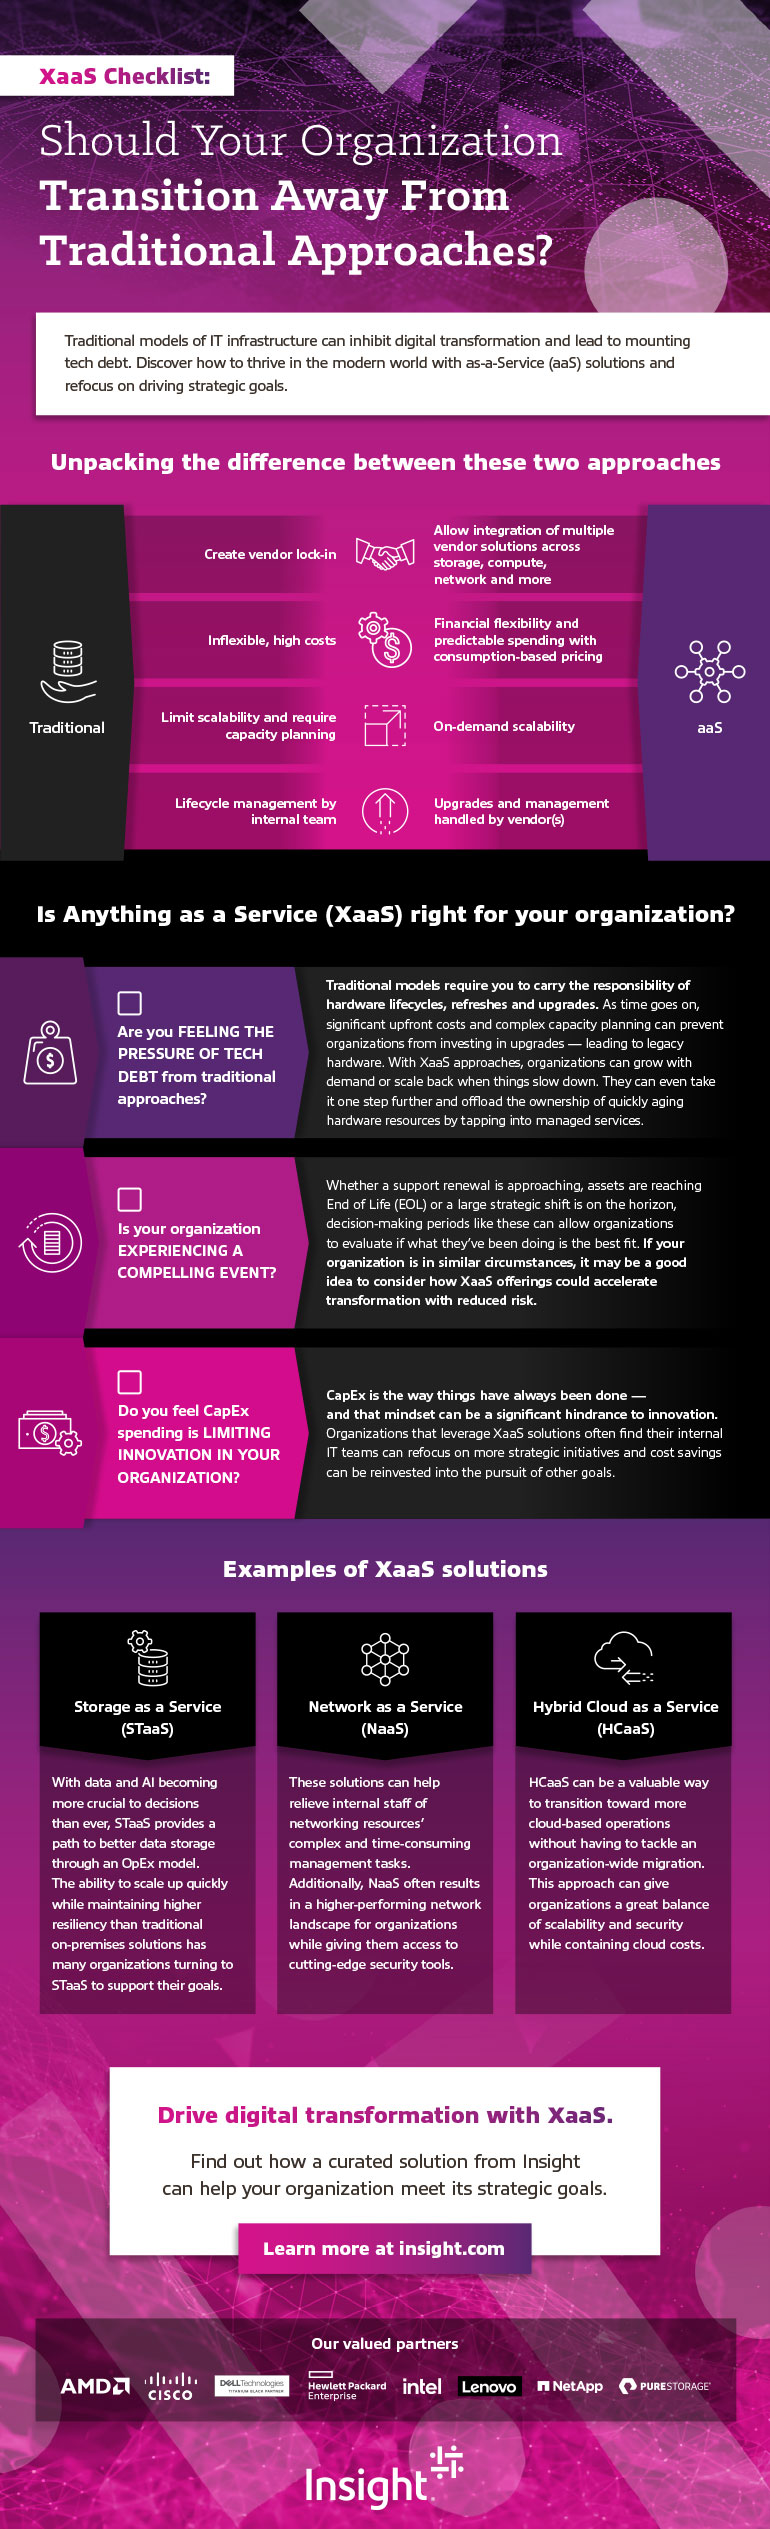  XaaS Checklist: Should Your Business Transition Away from Traditional Approaches?